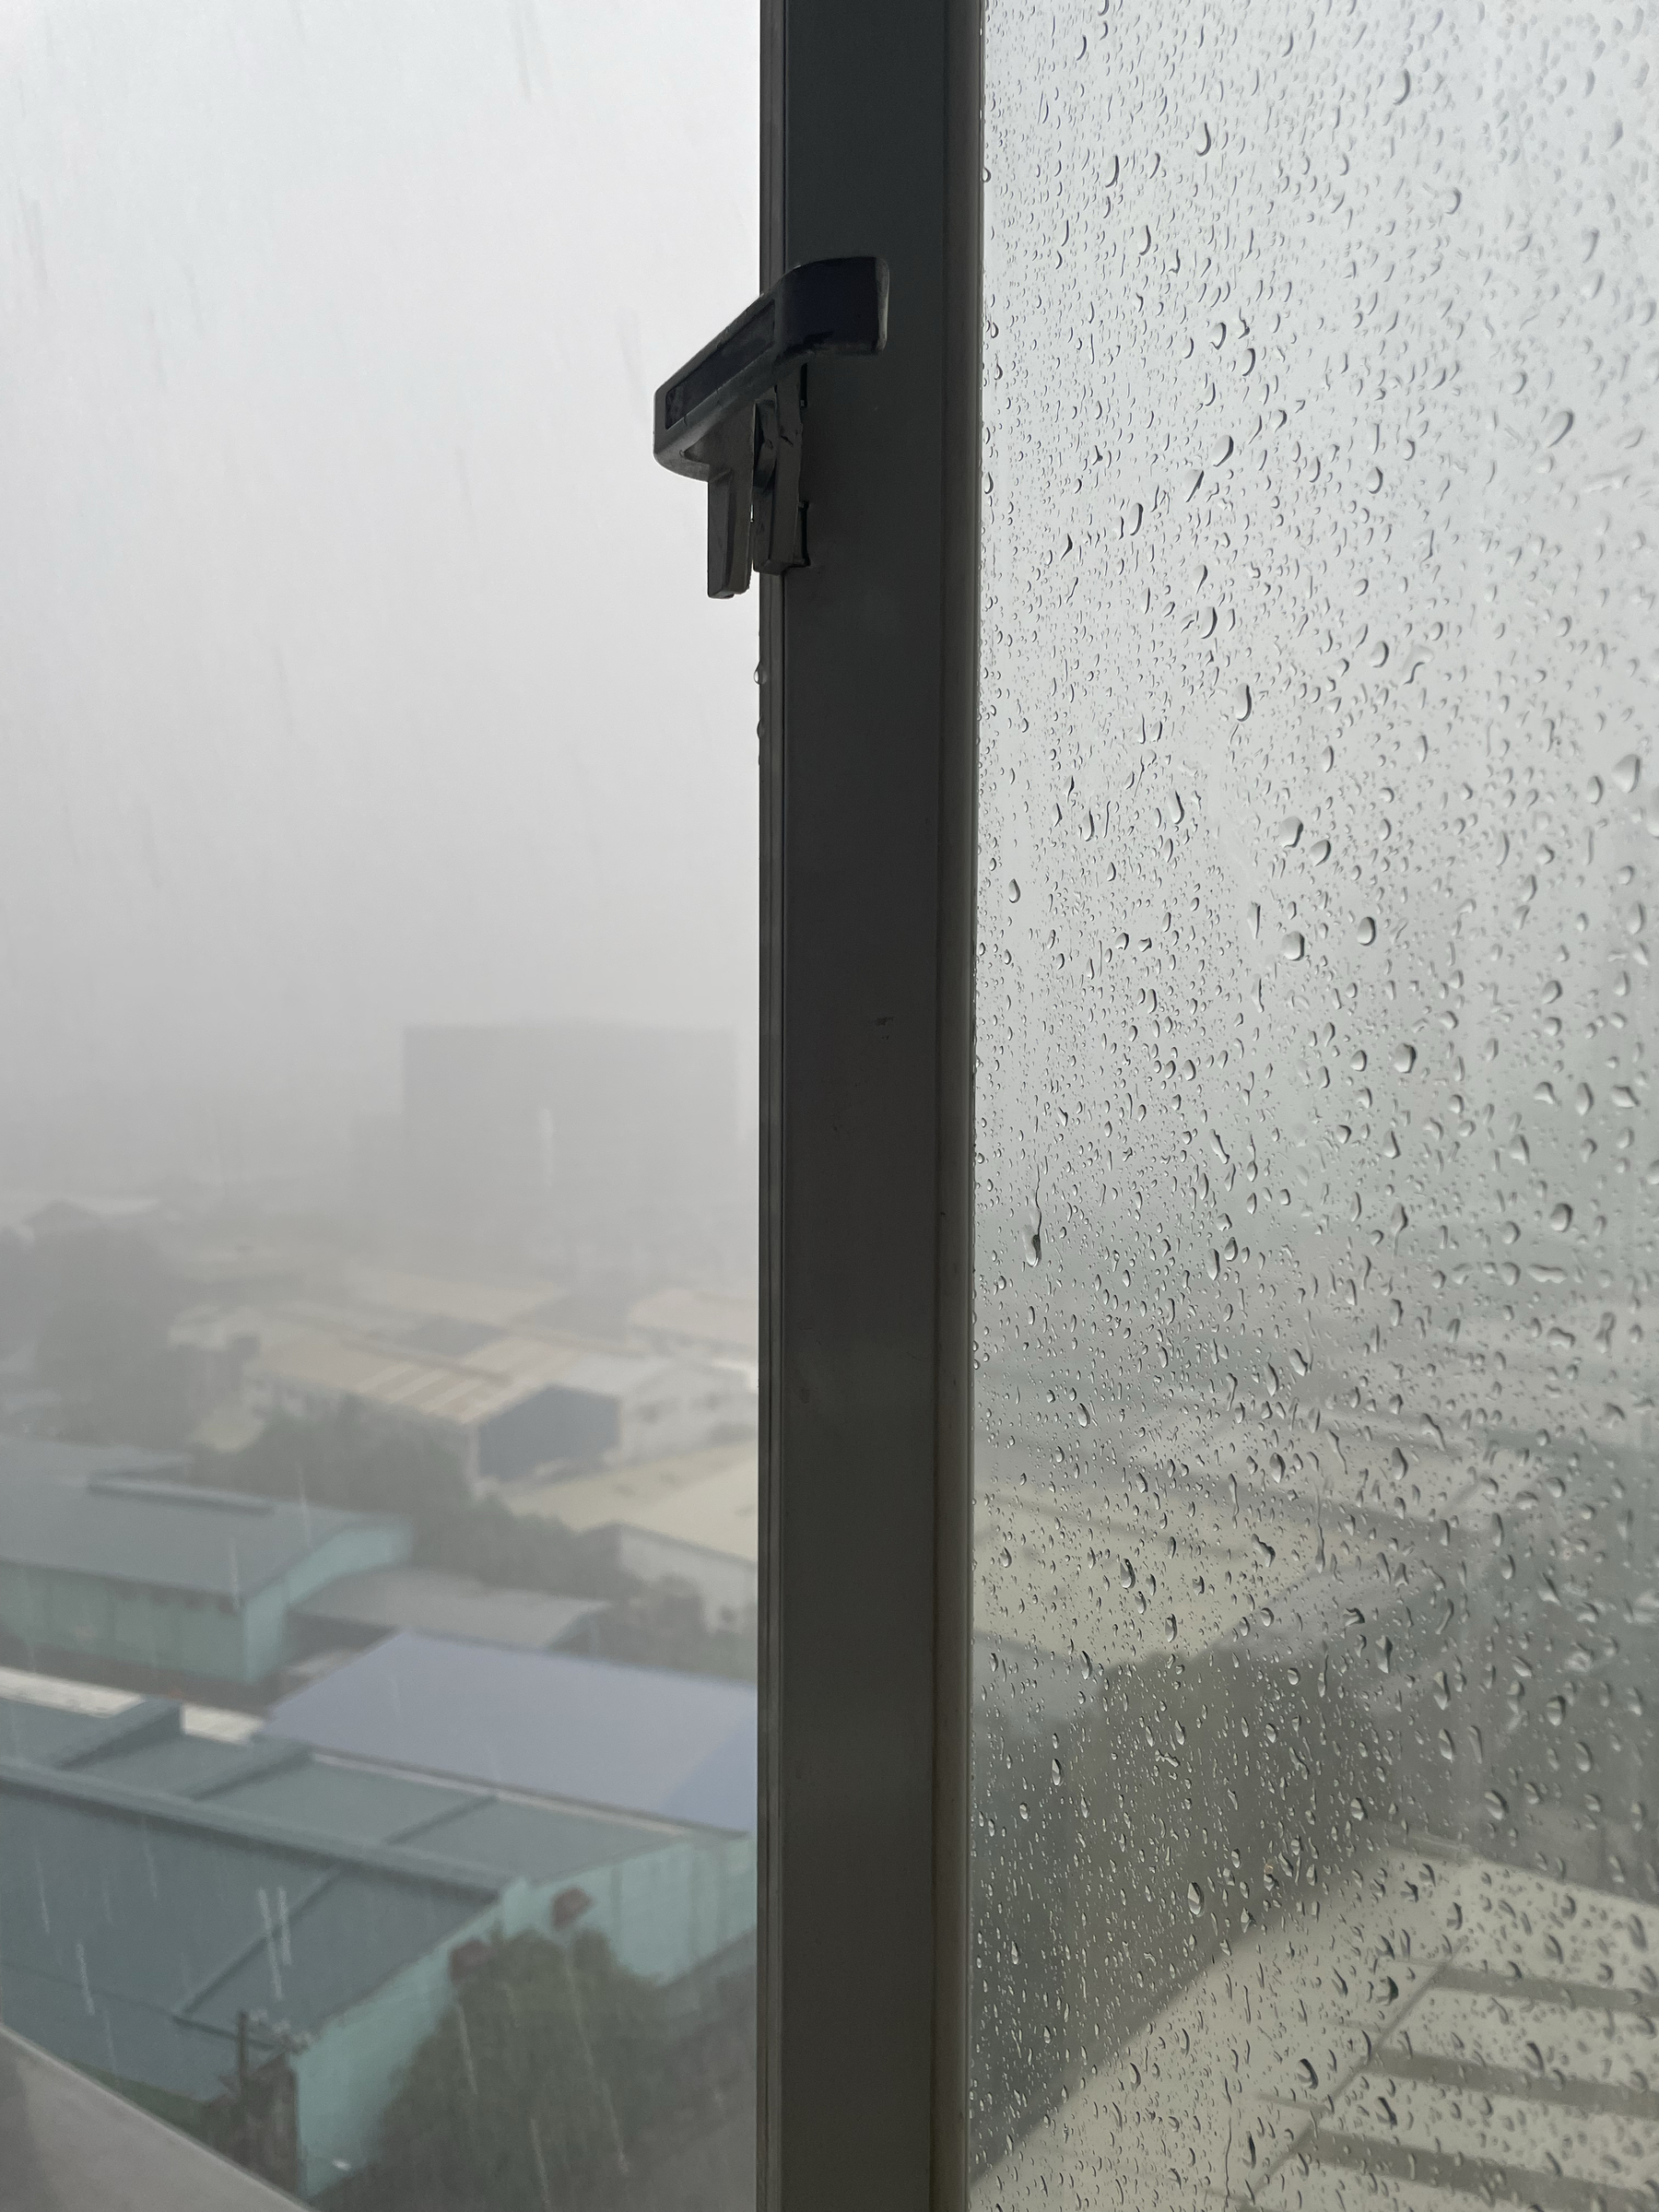 photo of a half opened window with lots of raindrops on its surface, showing the torrential rain outside providing low visibility